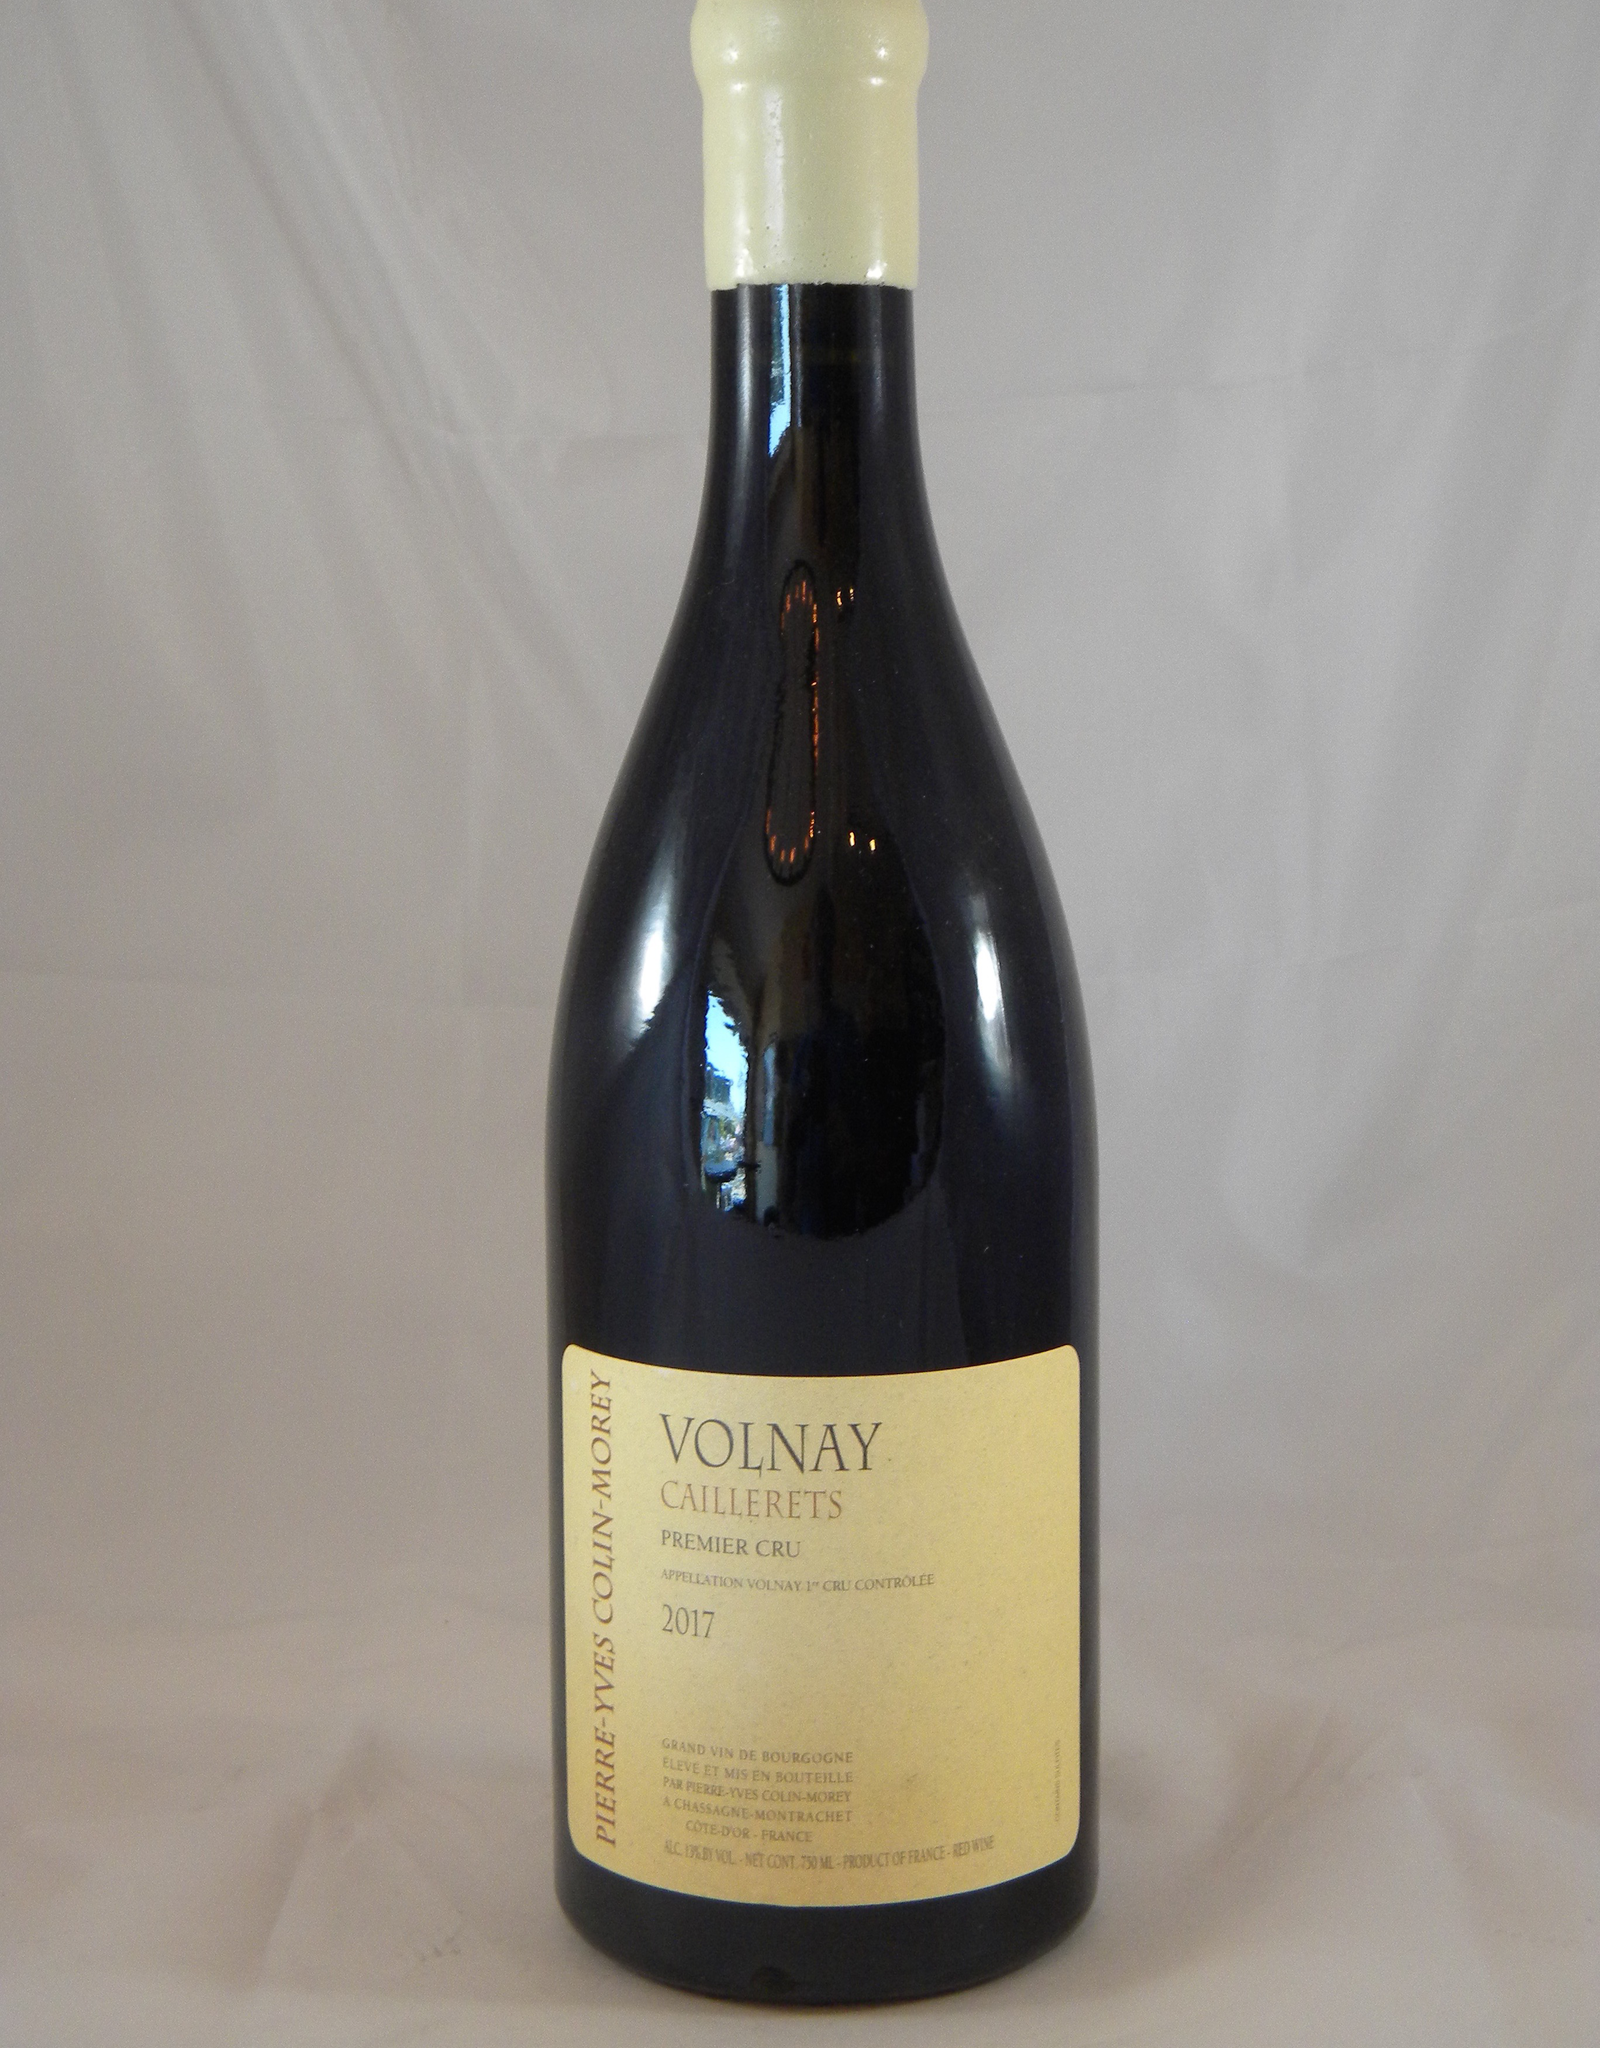 PYCM Pierre Yves Colin Morey Volnay 1er Cru Caillerets 2018